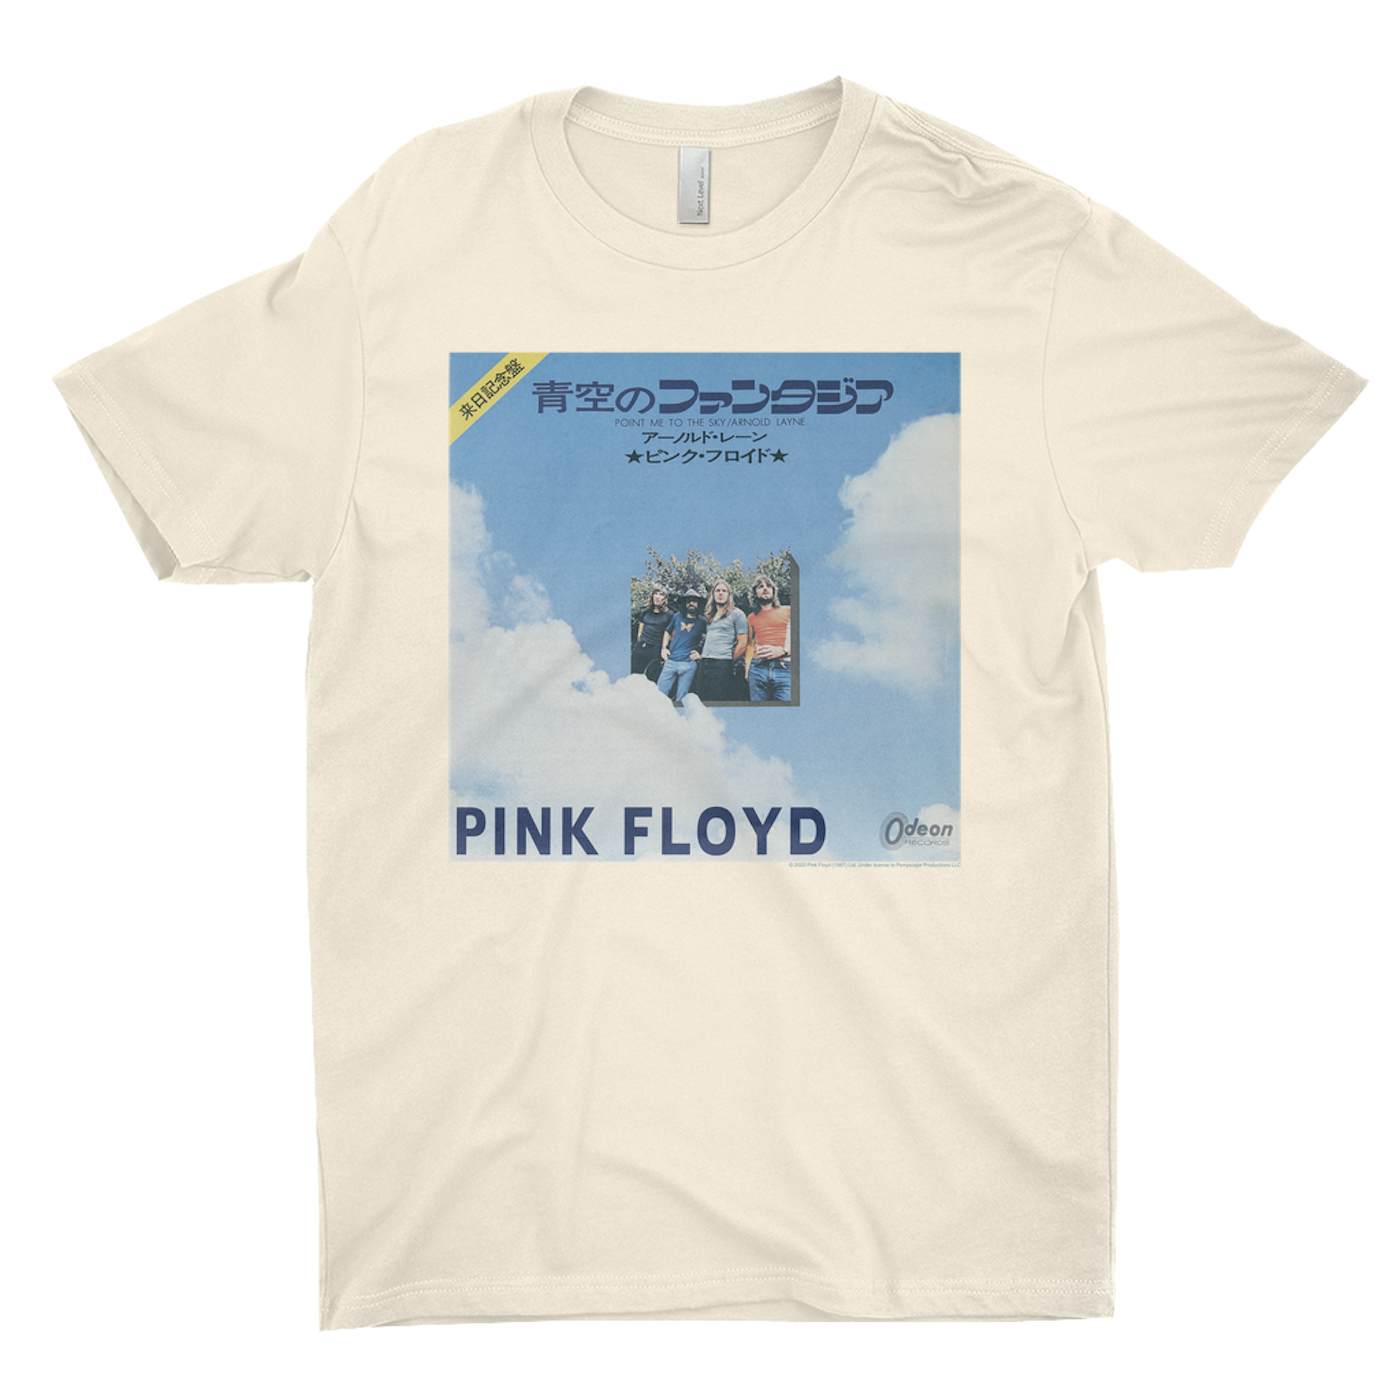 Pink Floyd T-Shirt | Point Me To The Sky And Arnold Layne Japanese